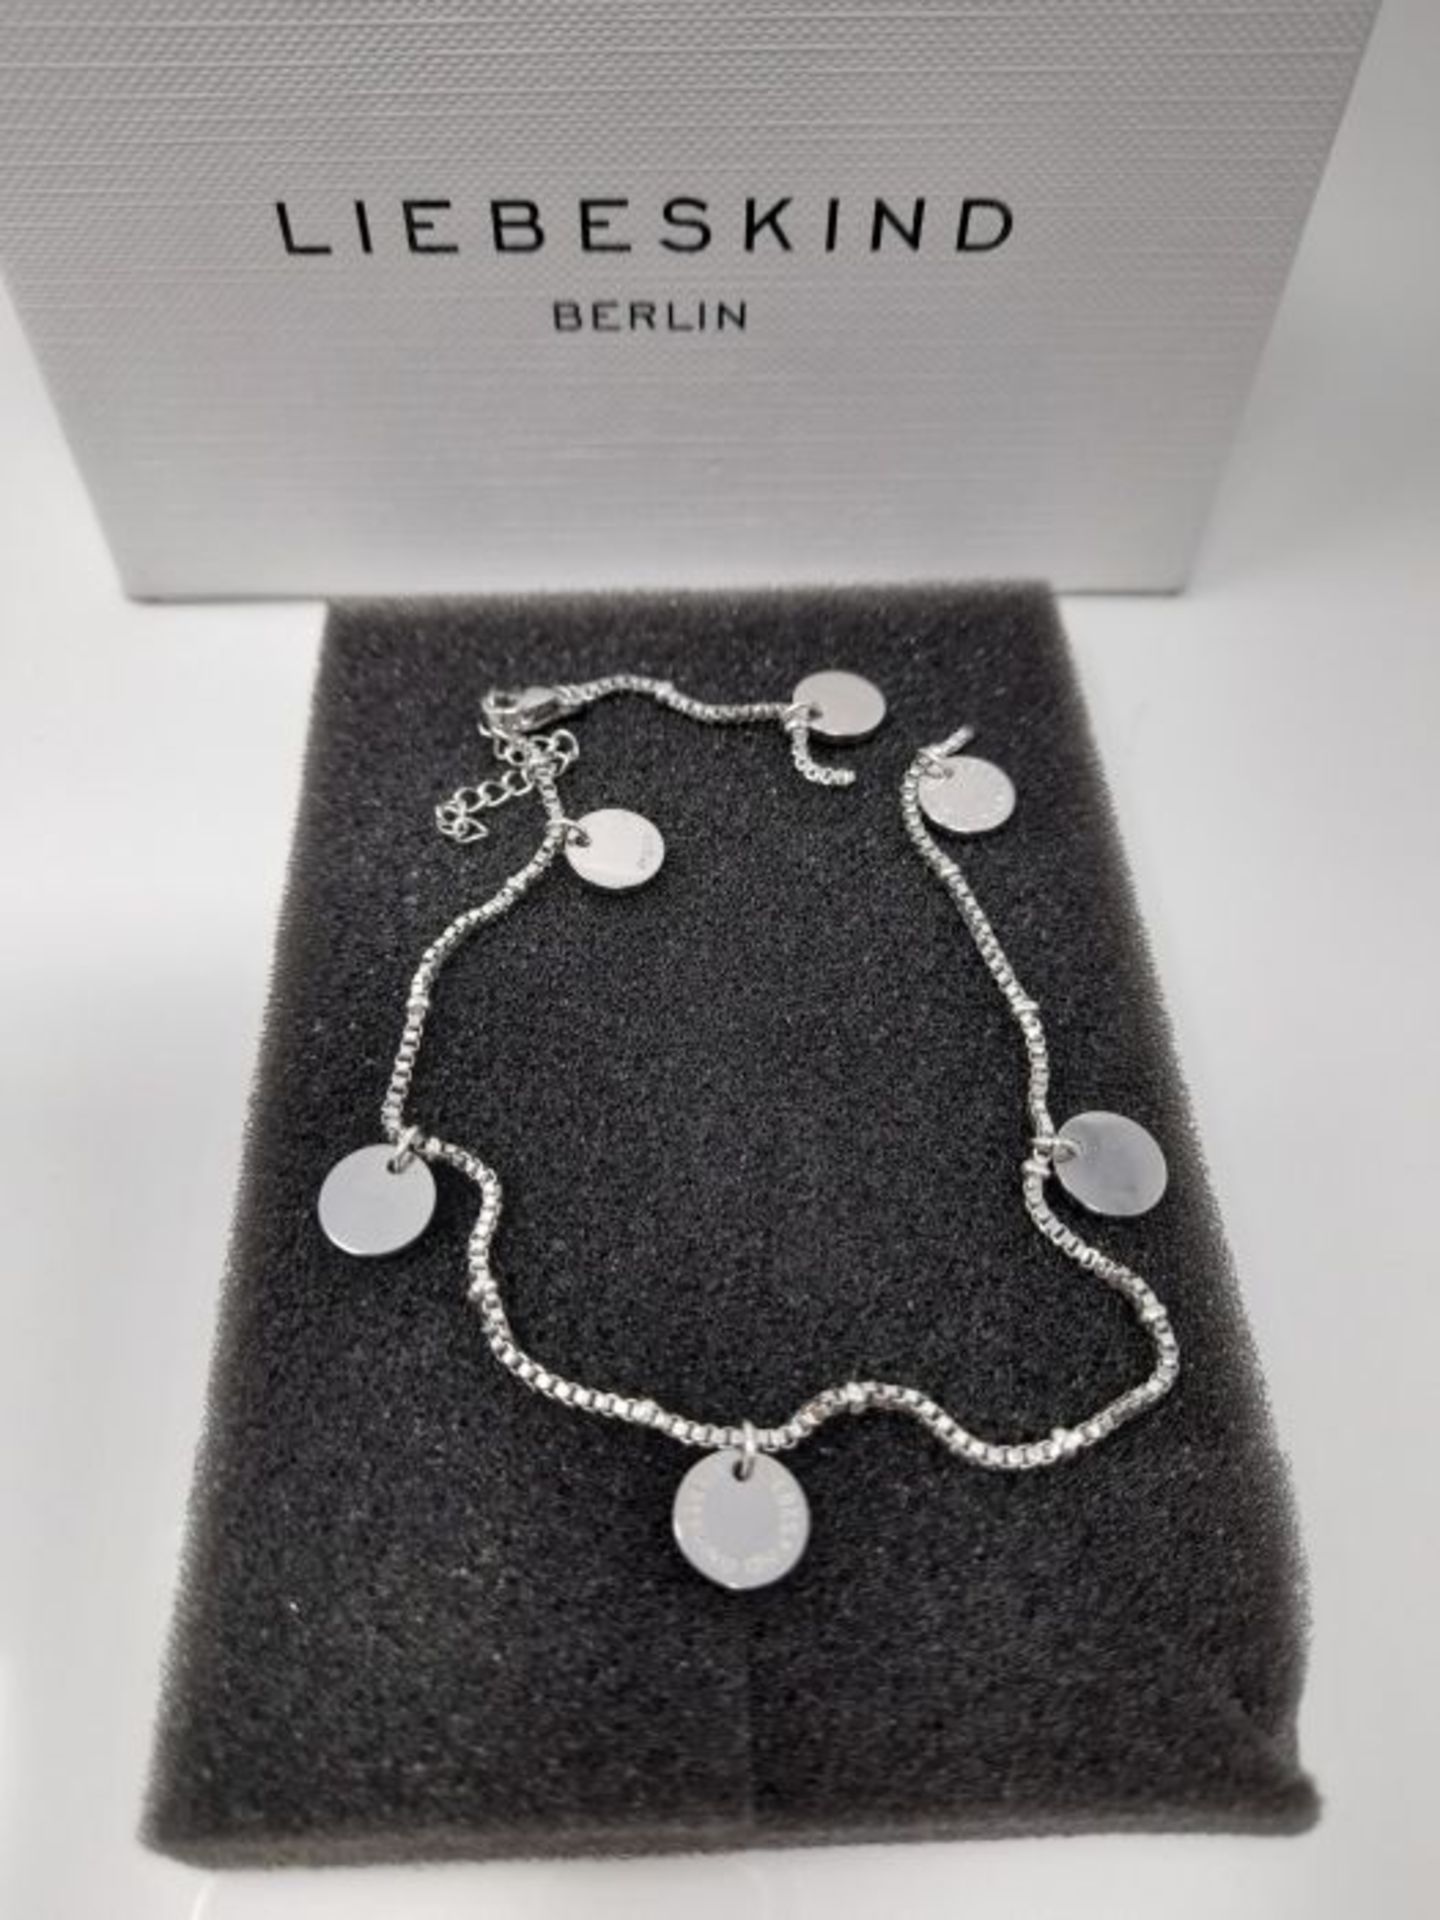 [CRACKED] Liebeskind Berlin Women Stainless Steel Anklet - LJ-0422-A-27 - Image 3 of 3